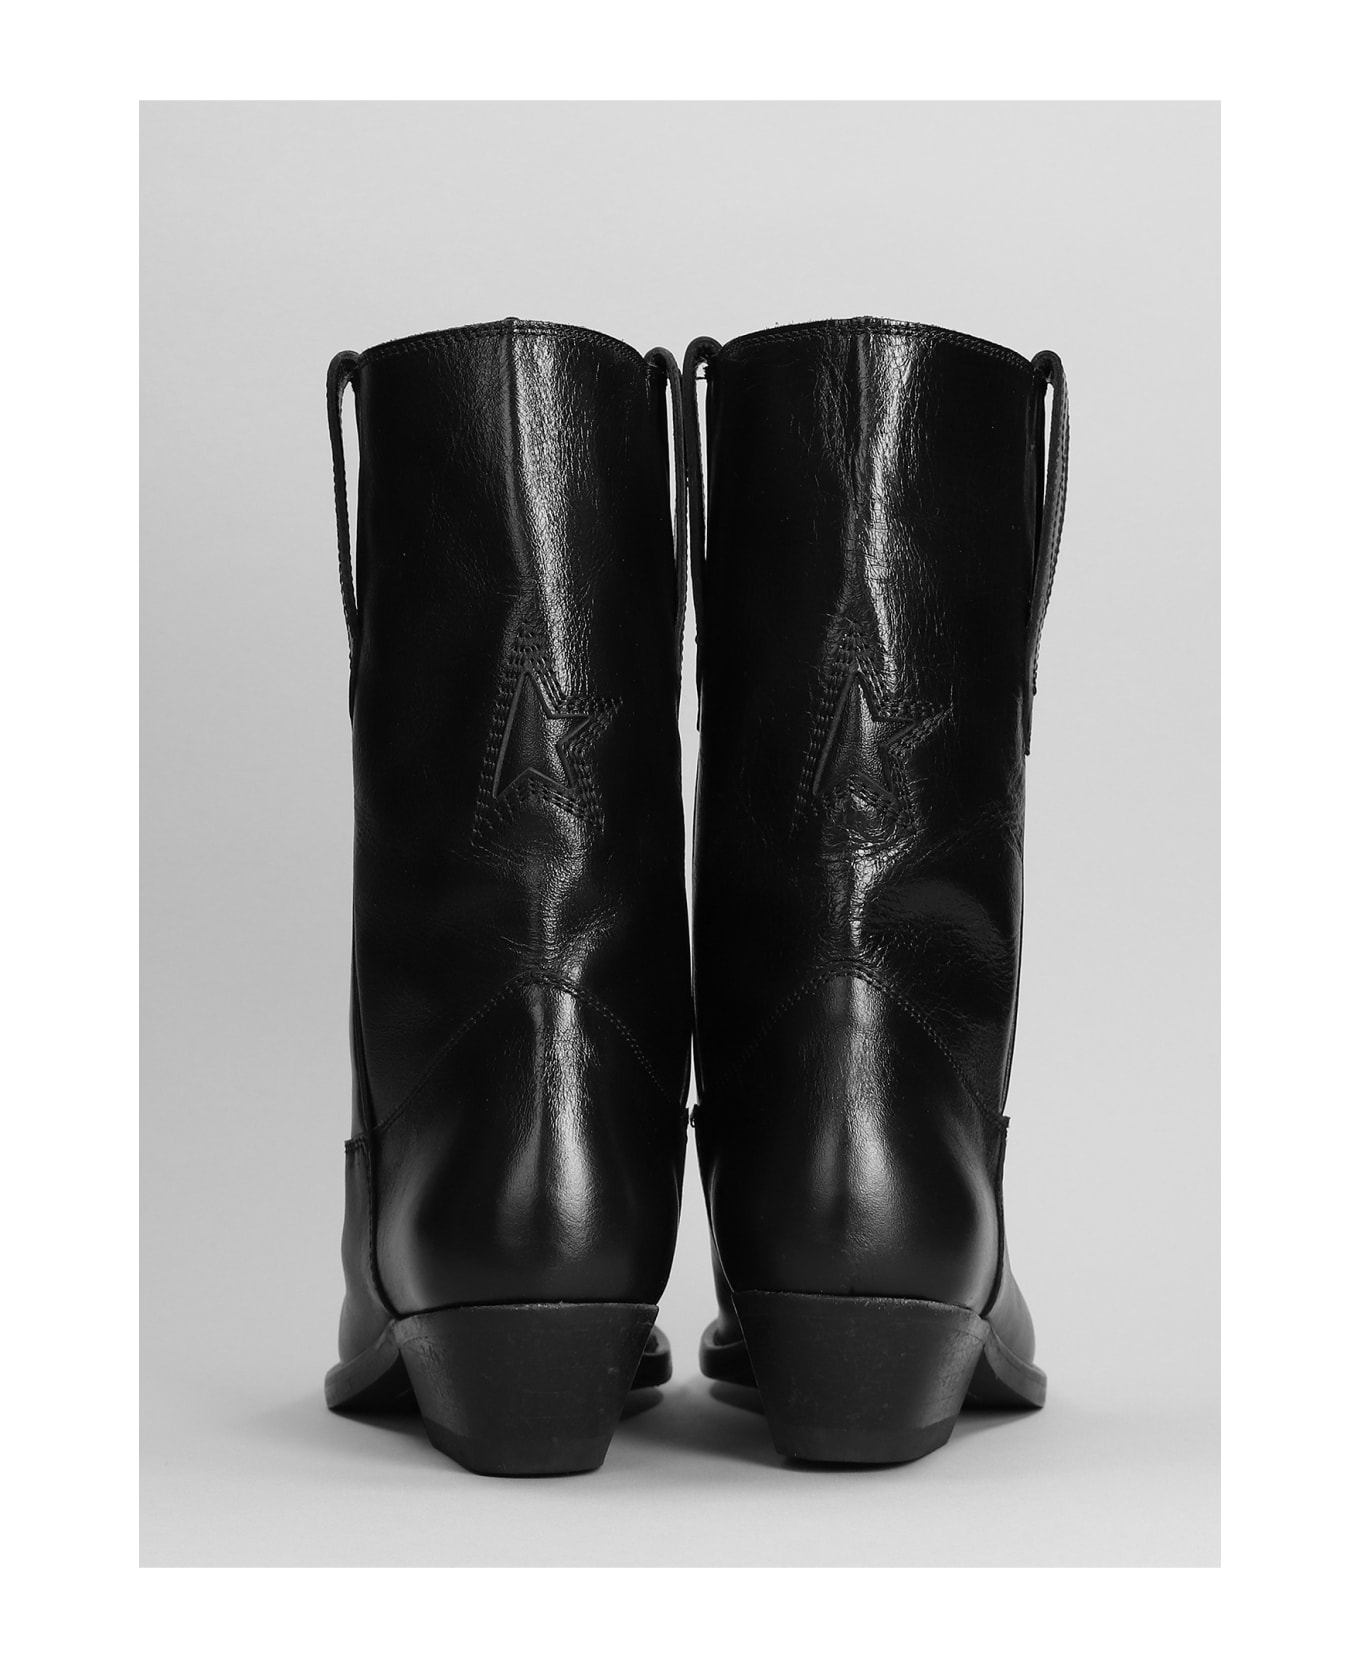 Golden Goose Wish Star Texan Boots In Black Leather - black